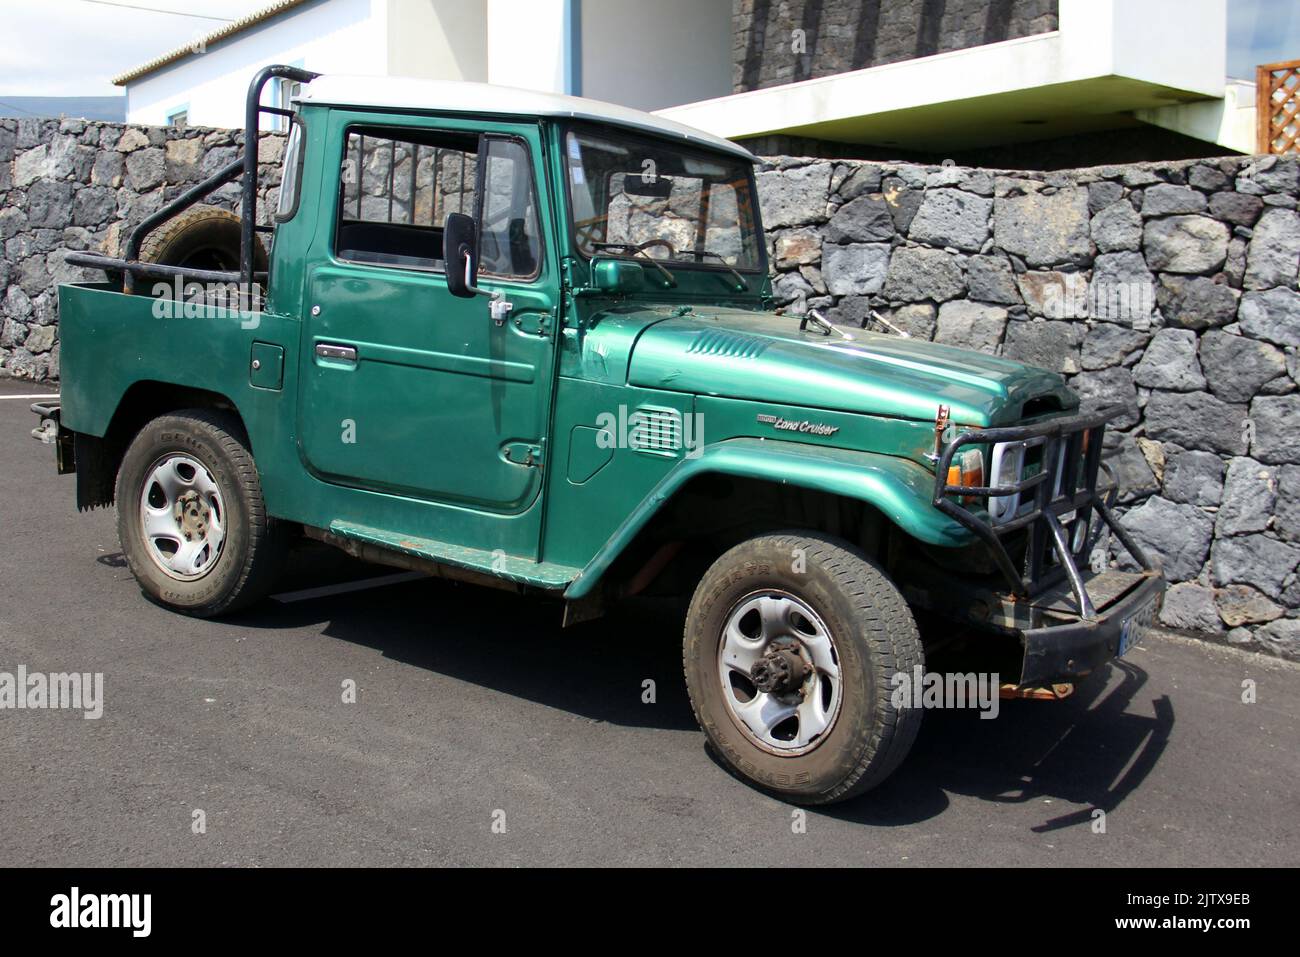 Toyota Land Cruiser pickup truck, 1970-s and 1980-s FJ43 model, parked on a sloping asphalt road, Cinco Ribeiras, Terceira, Azores, Portugal Stock Photo